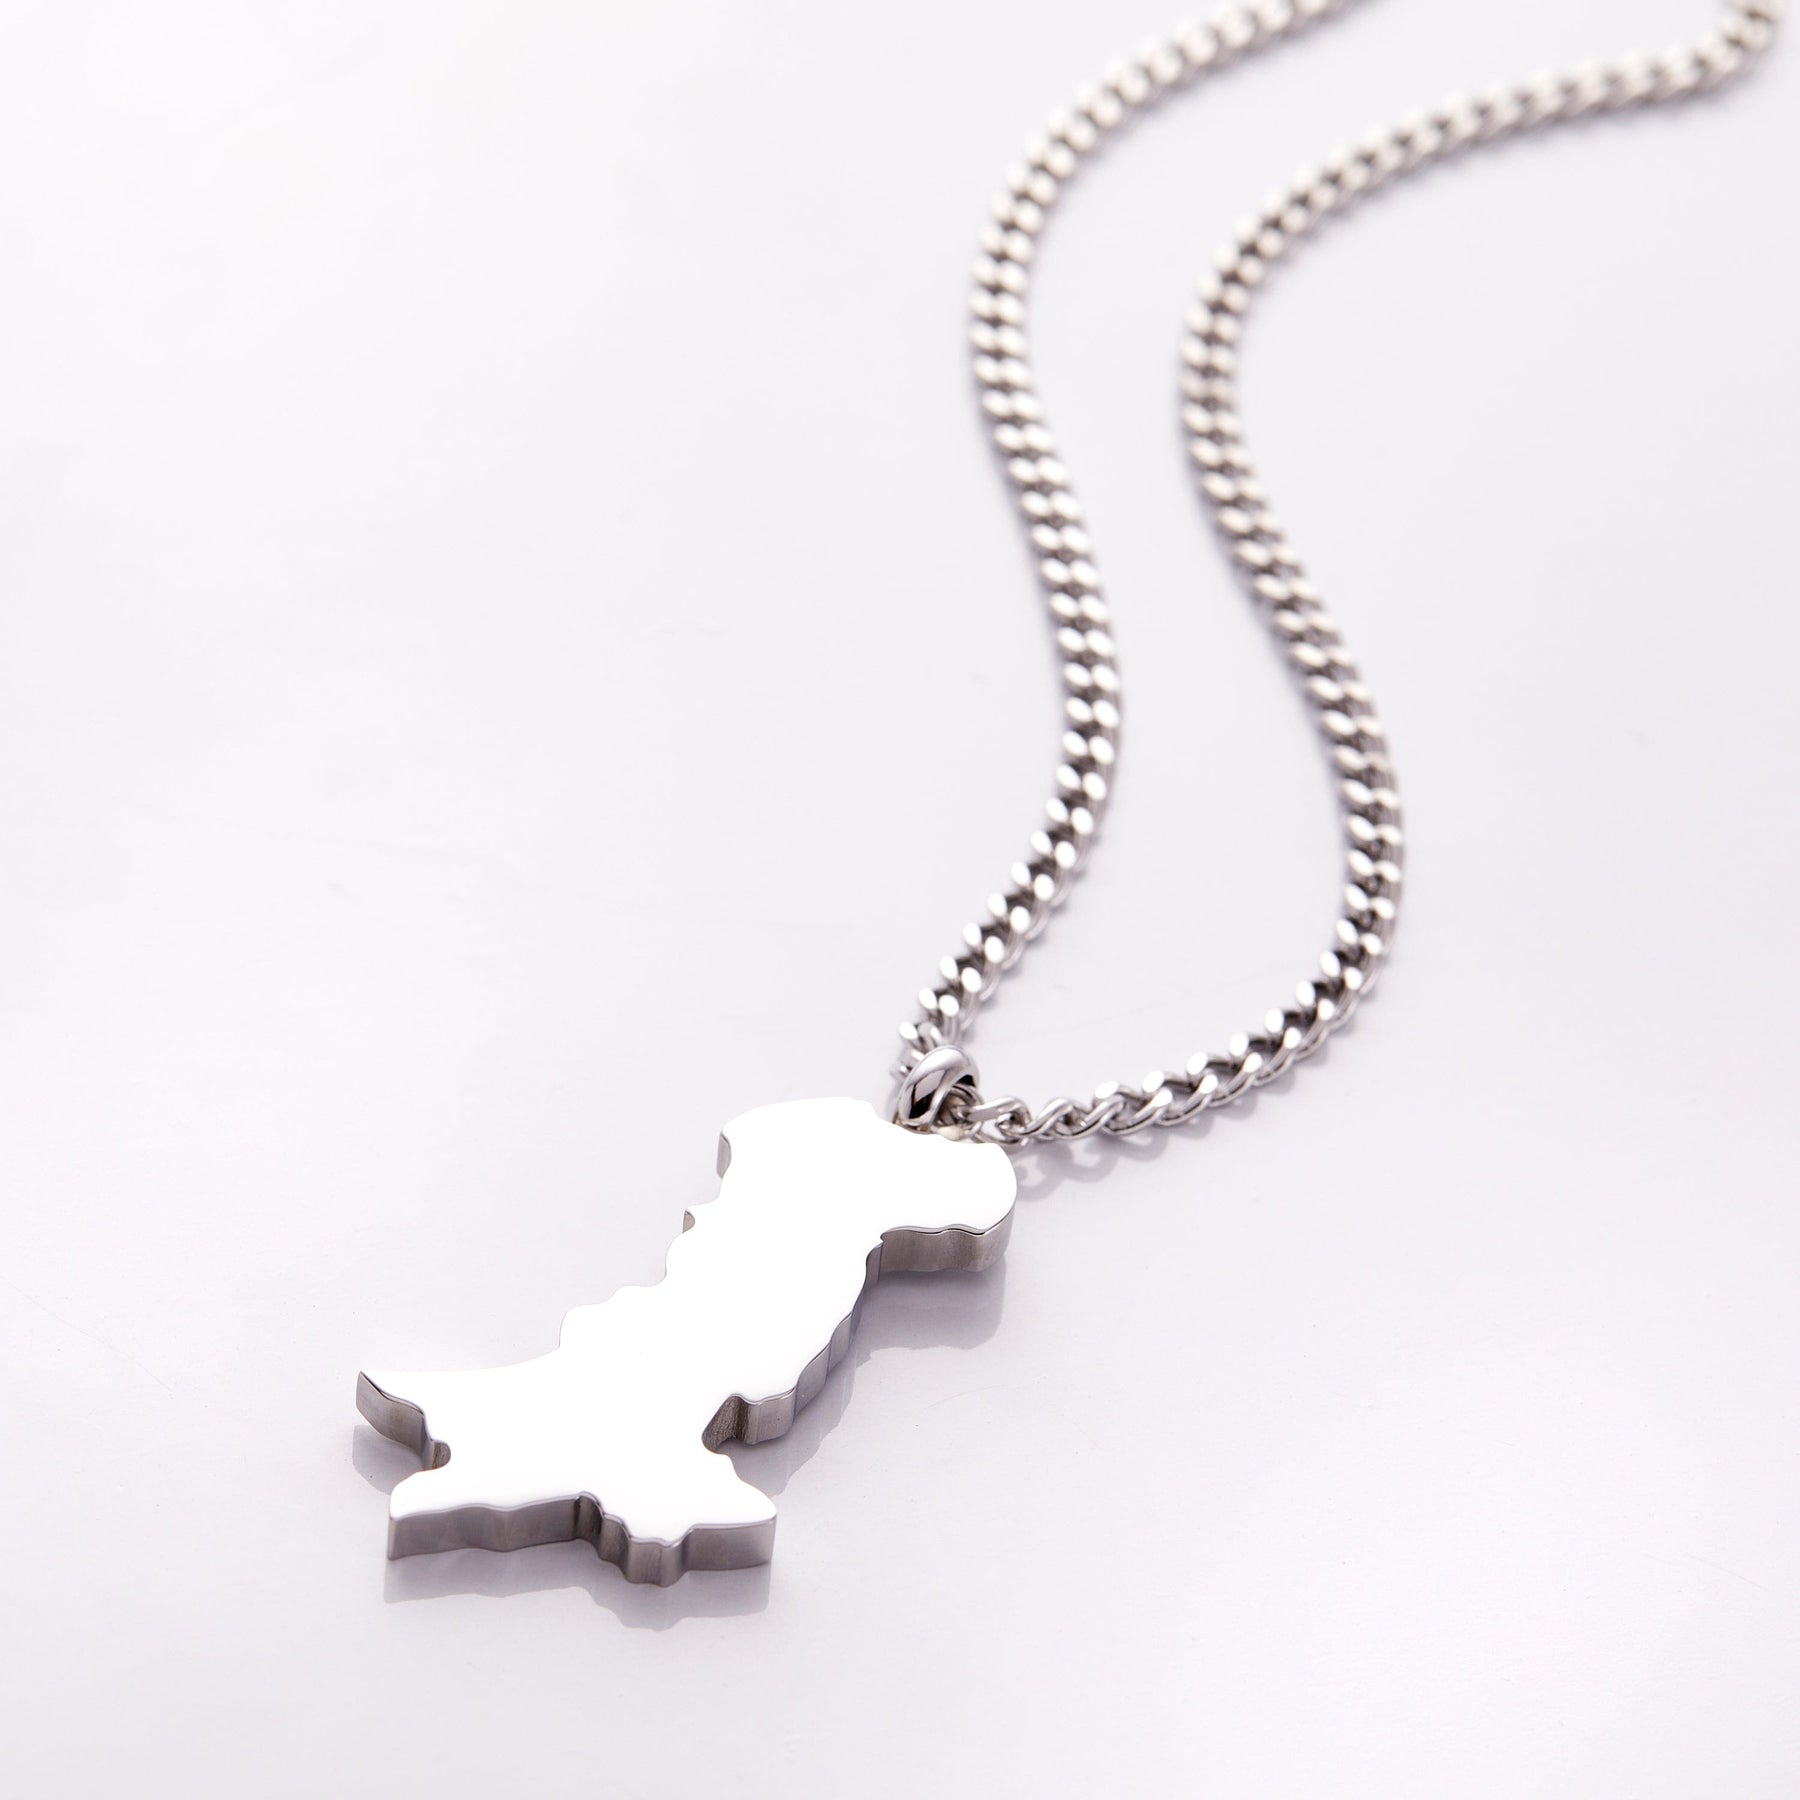 LAND OF THE PURE (PAKISTAN MAP NECKLACE)